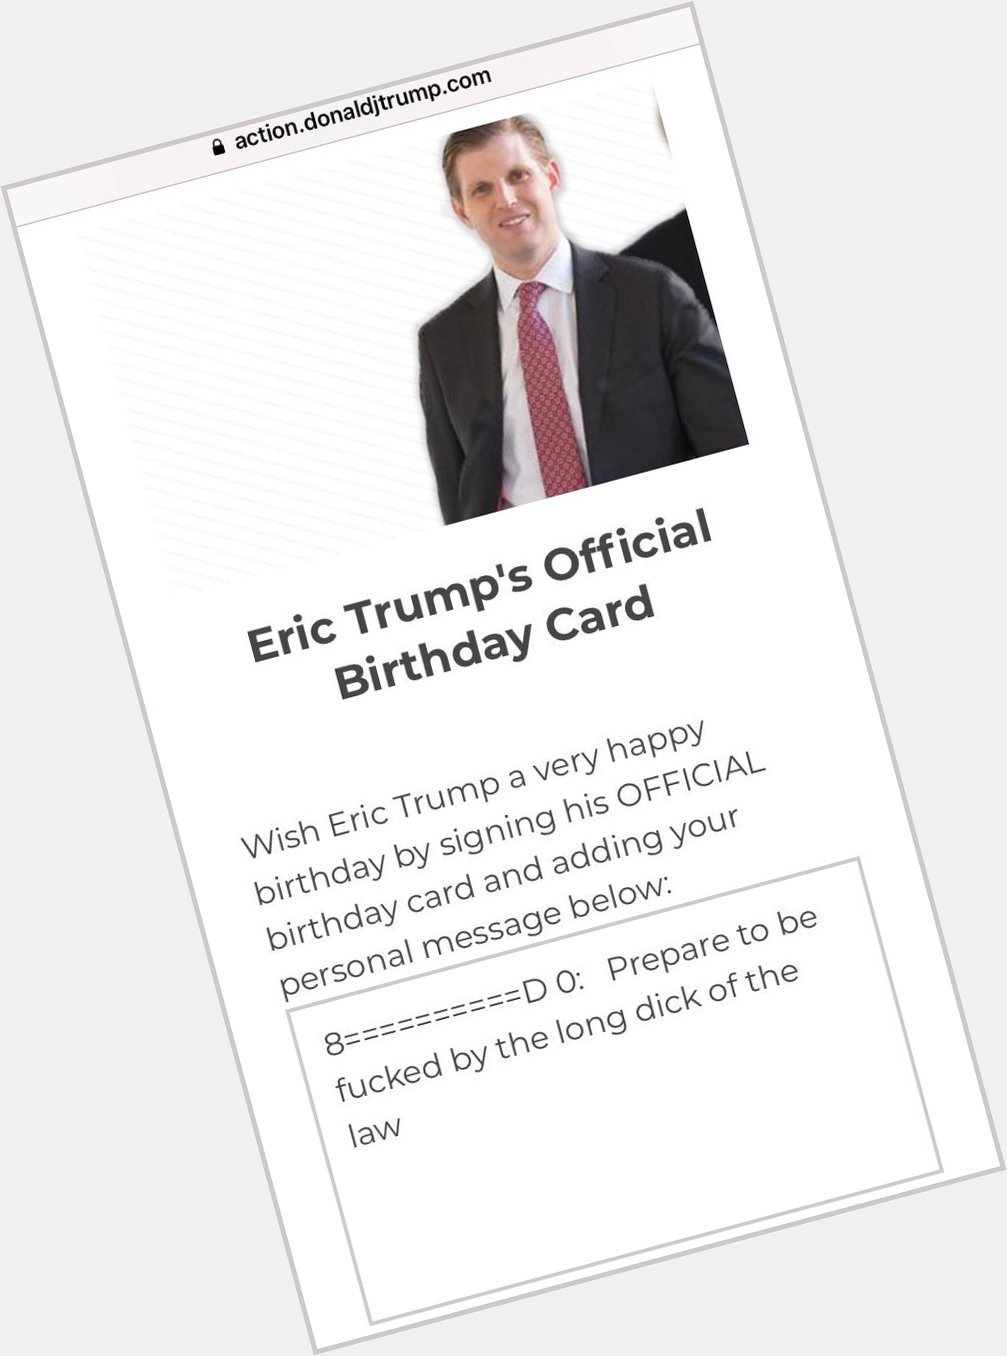 Y all go wish eric trump a happy birthday you can write whatever you want in there 